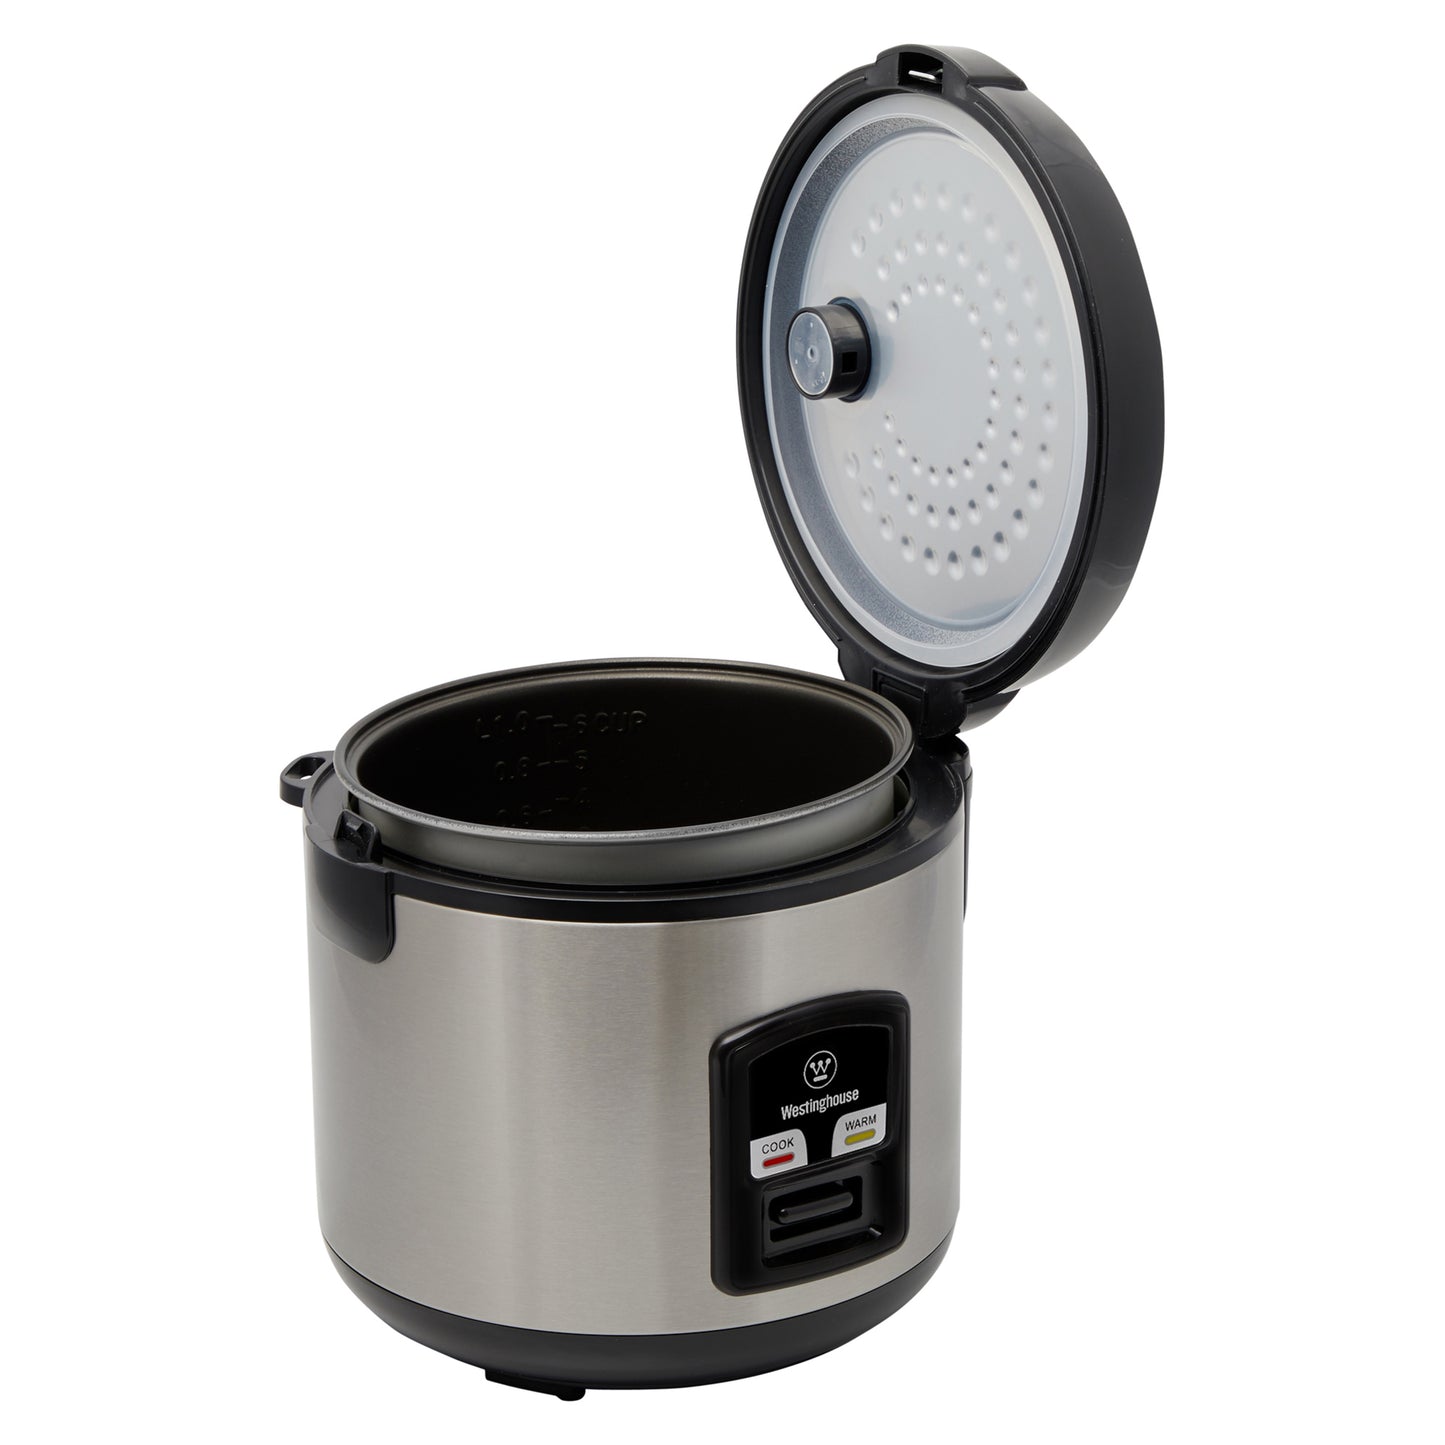 Westinghouse 6 Cup Rice Cooker Keep Warm Function